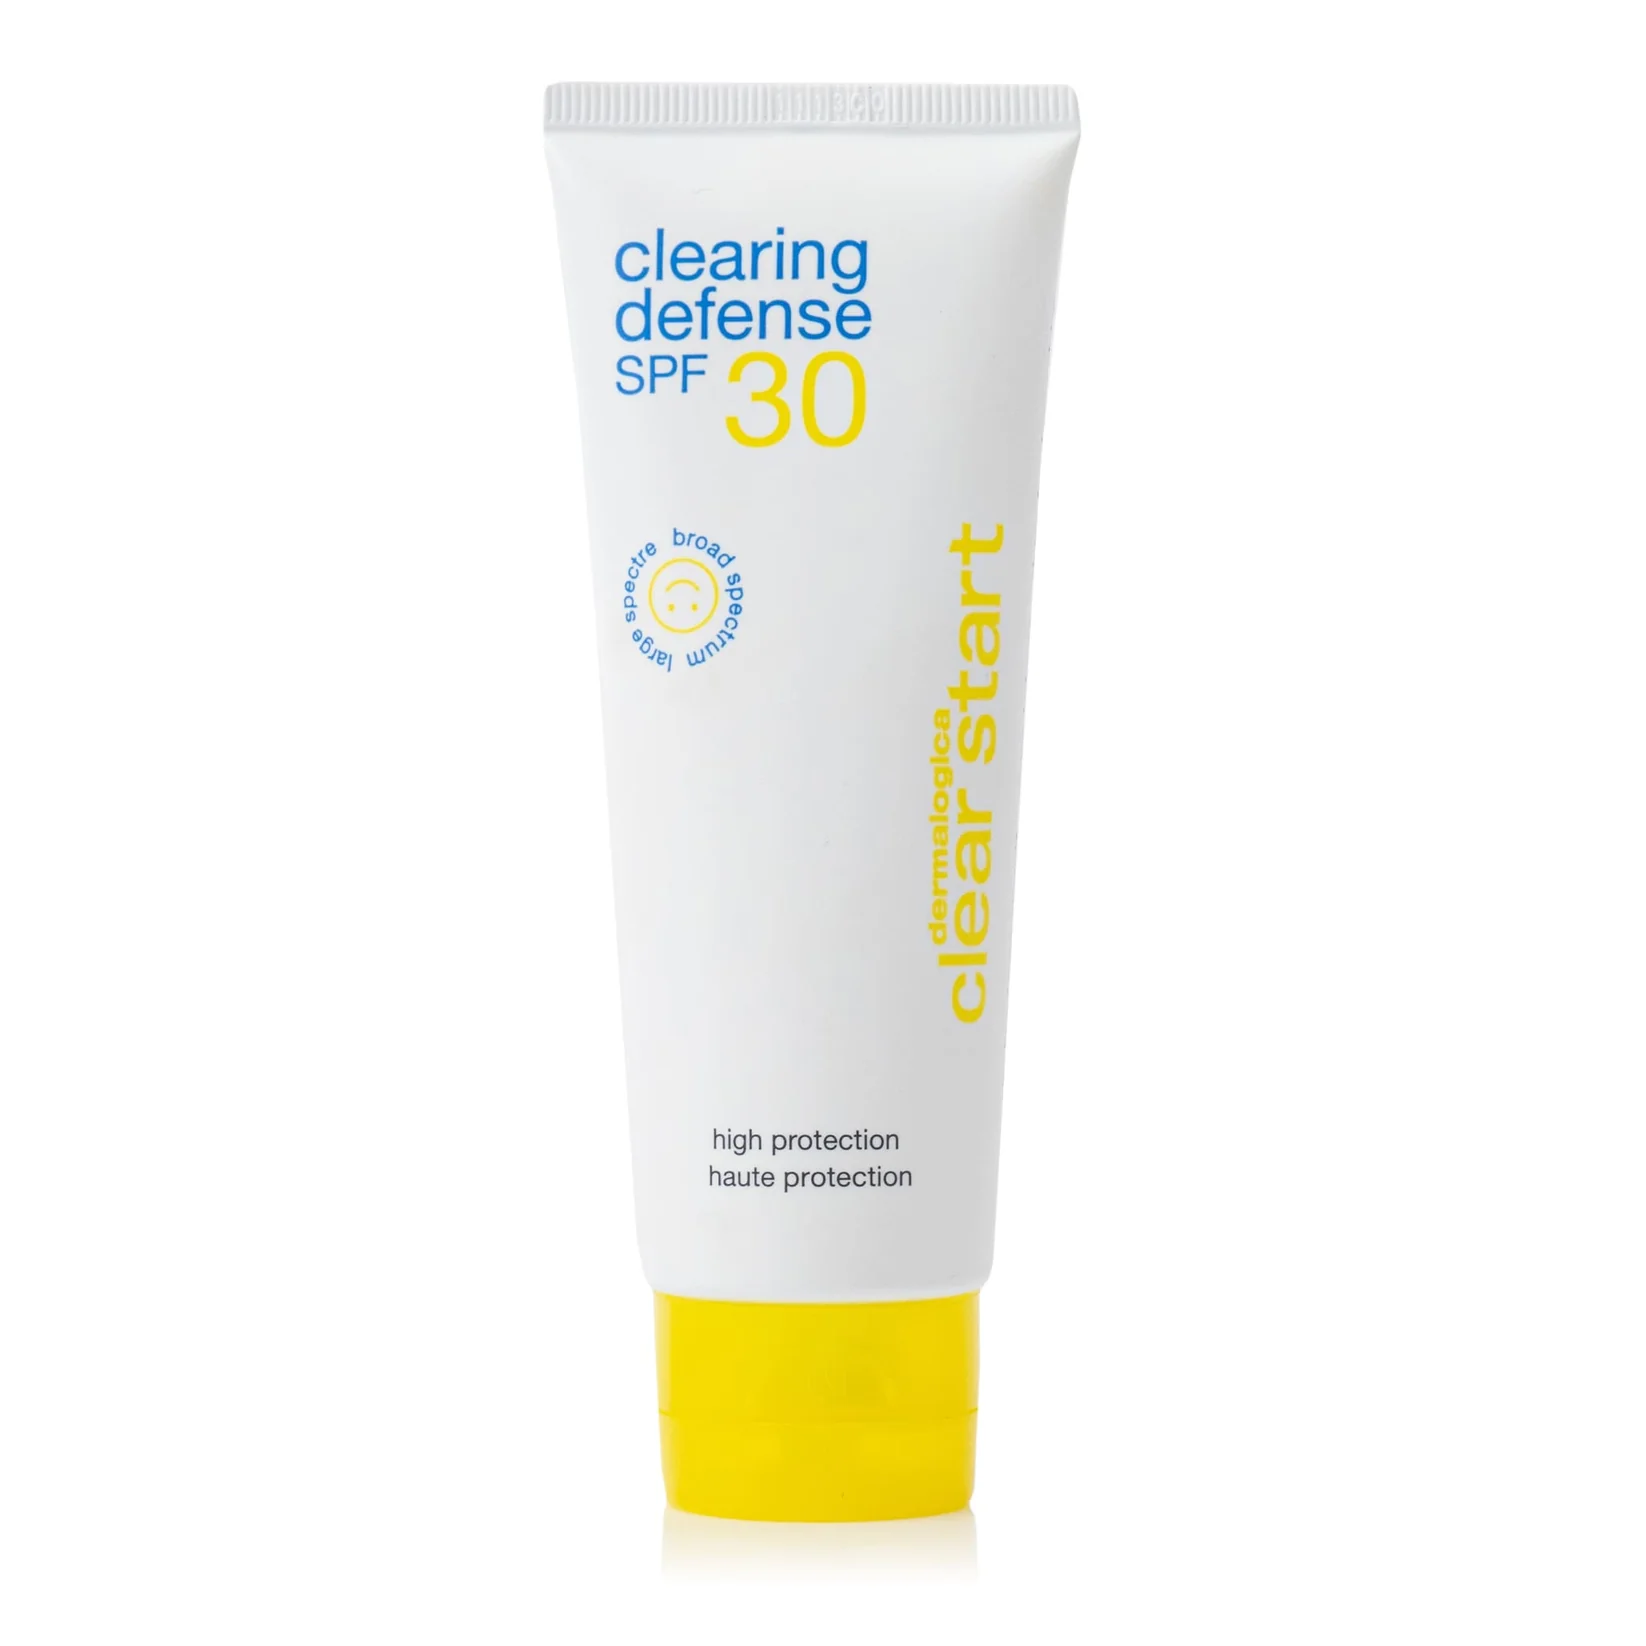 Clearing defense cream in a white tube